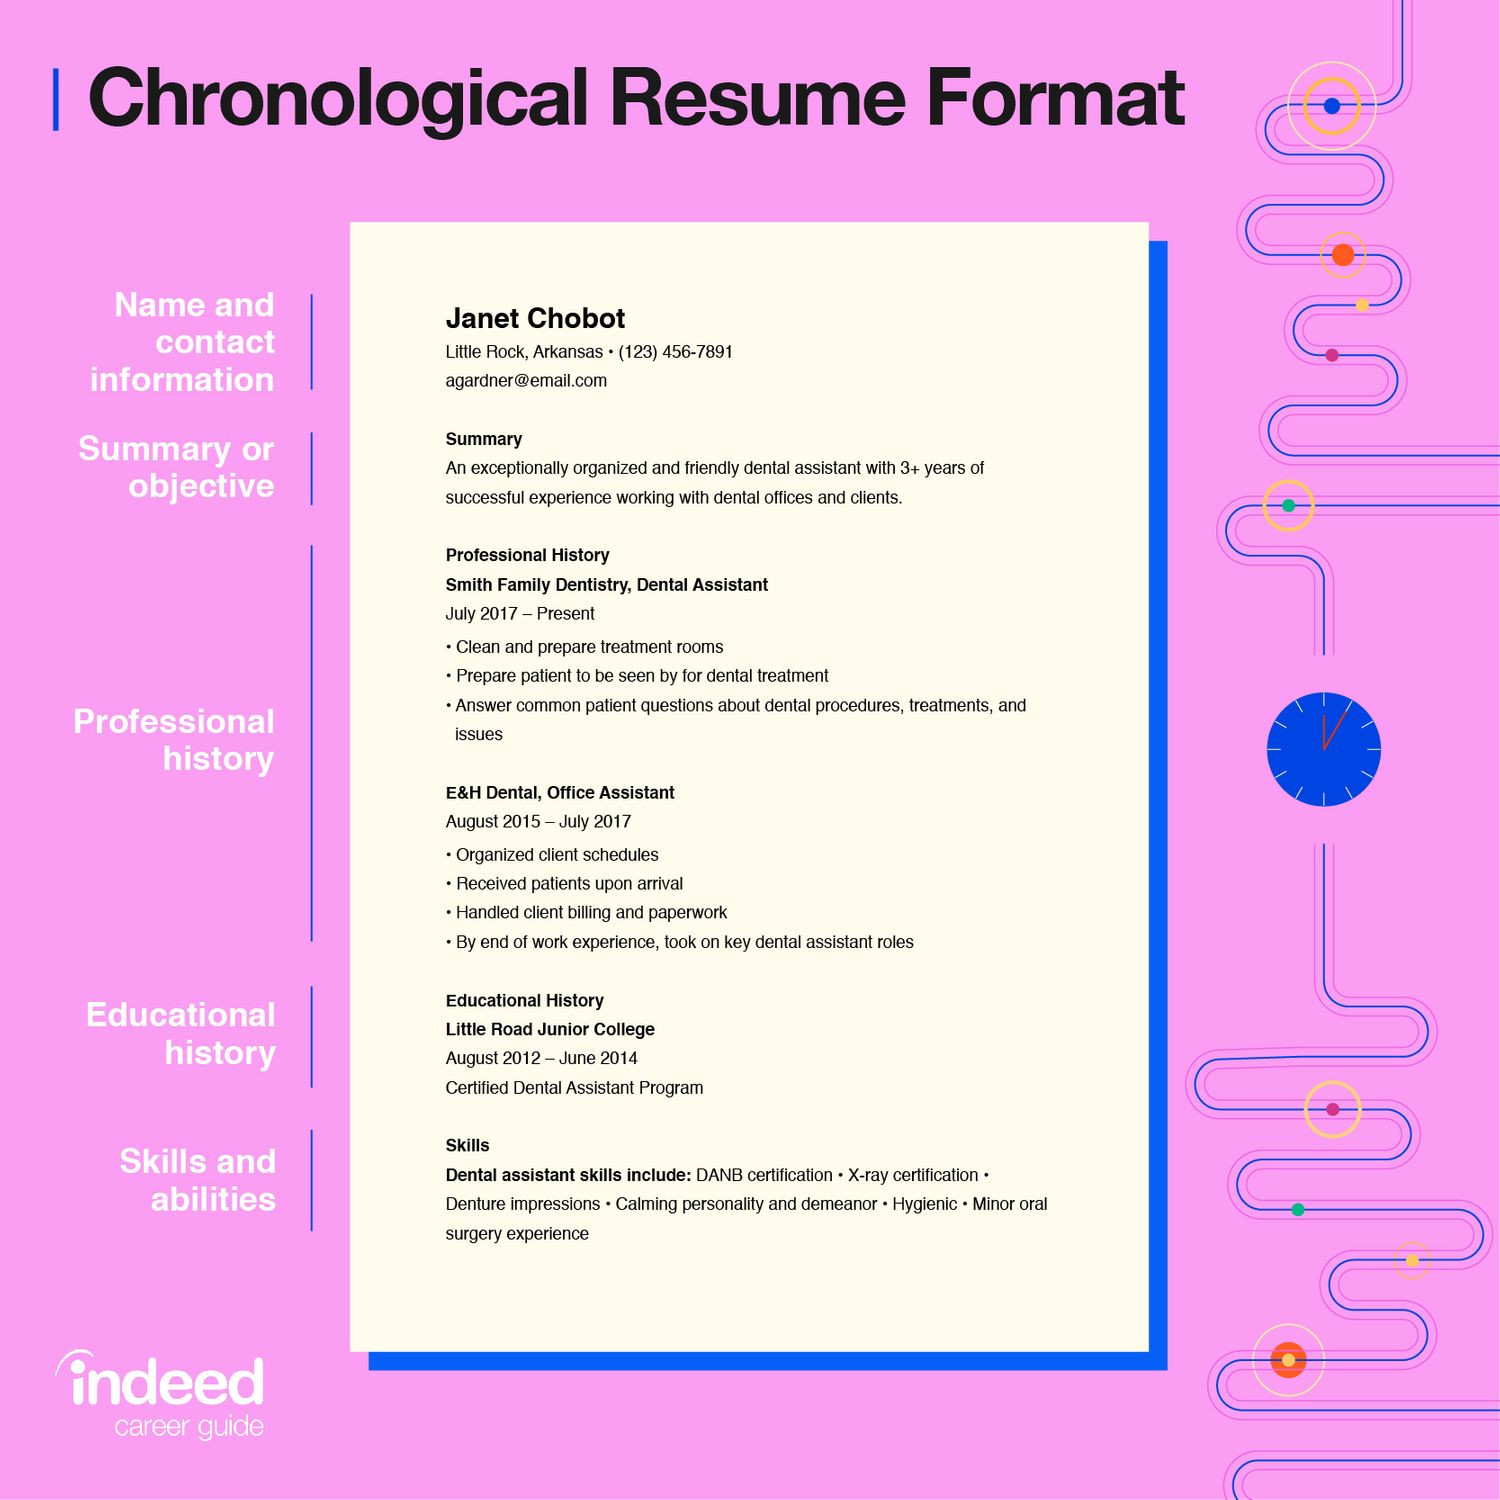 Indeed Resume Samples On Wifi Testing How to Make A Comprehensive Resume (with Examples) Indeed.com